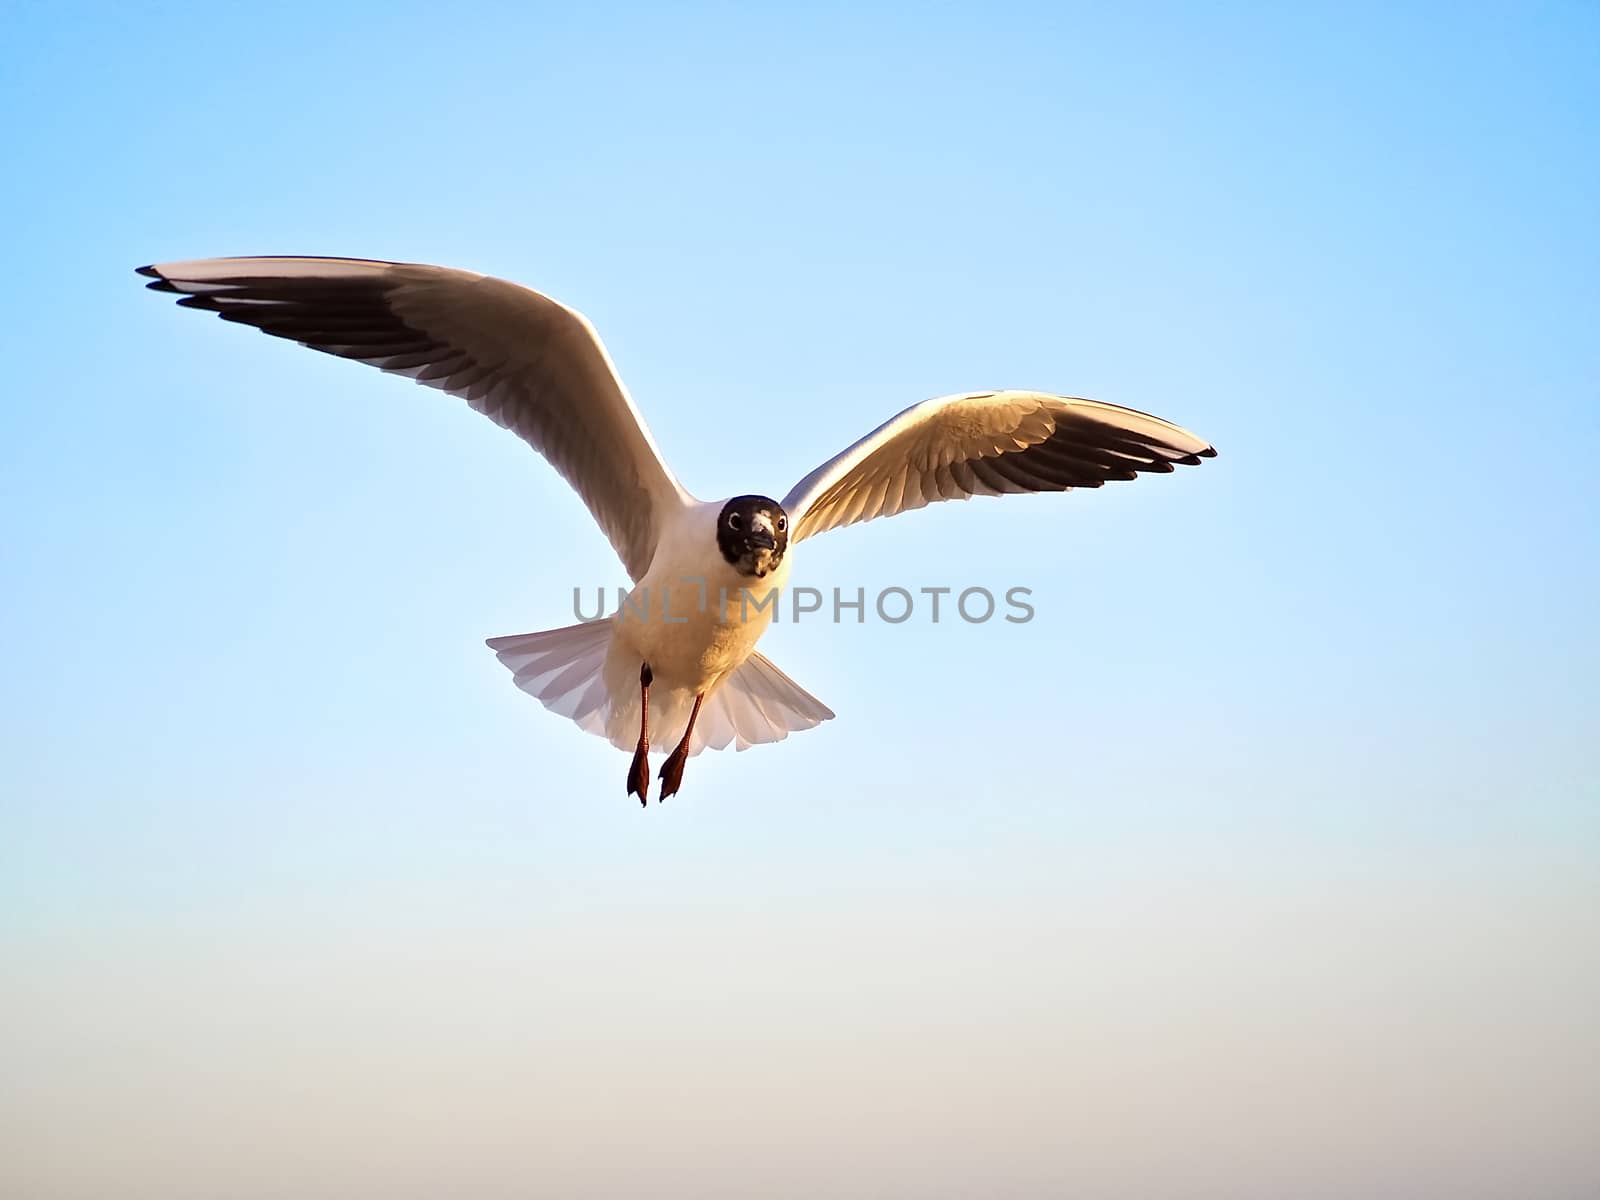 Single seagull flying at the beach by Stimmungsbilder